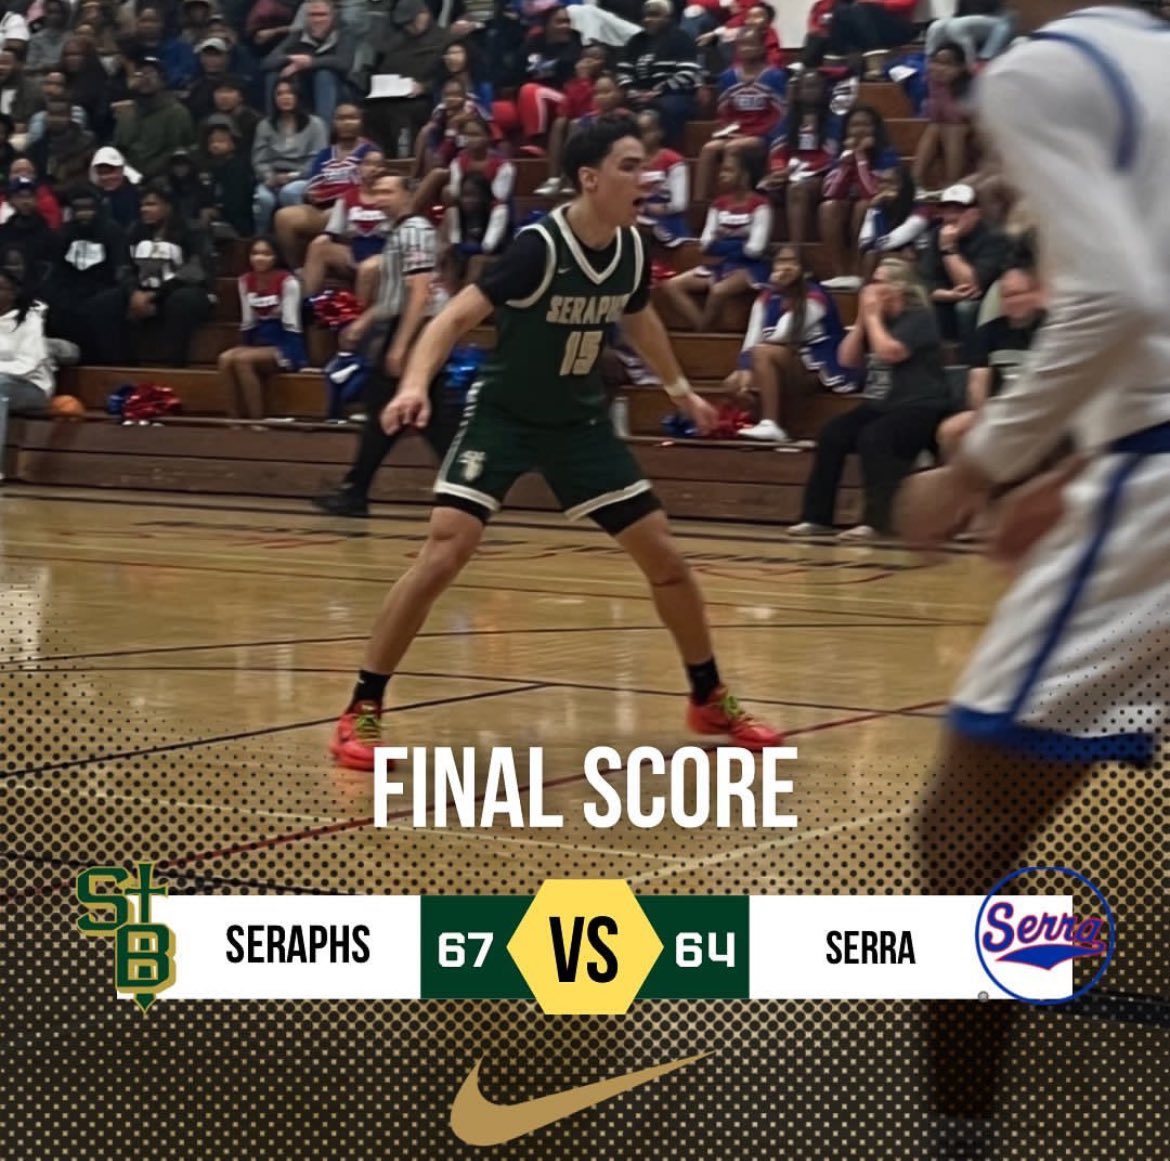 FINAL: St. Bonaventure 67, Serra 64. Seraphs (24-8, 8-0) win on the road to advance to their second straight CIF finals. @GoodcaseJeremy - 18pts (5 3’s) @dylanjbenner - 11pts, 10rebs @_samseiden - 11pts Donald Clark IV - 11pts